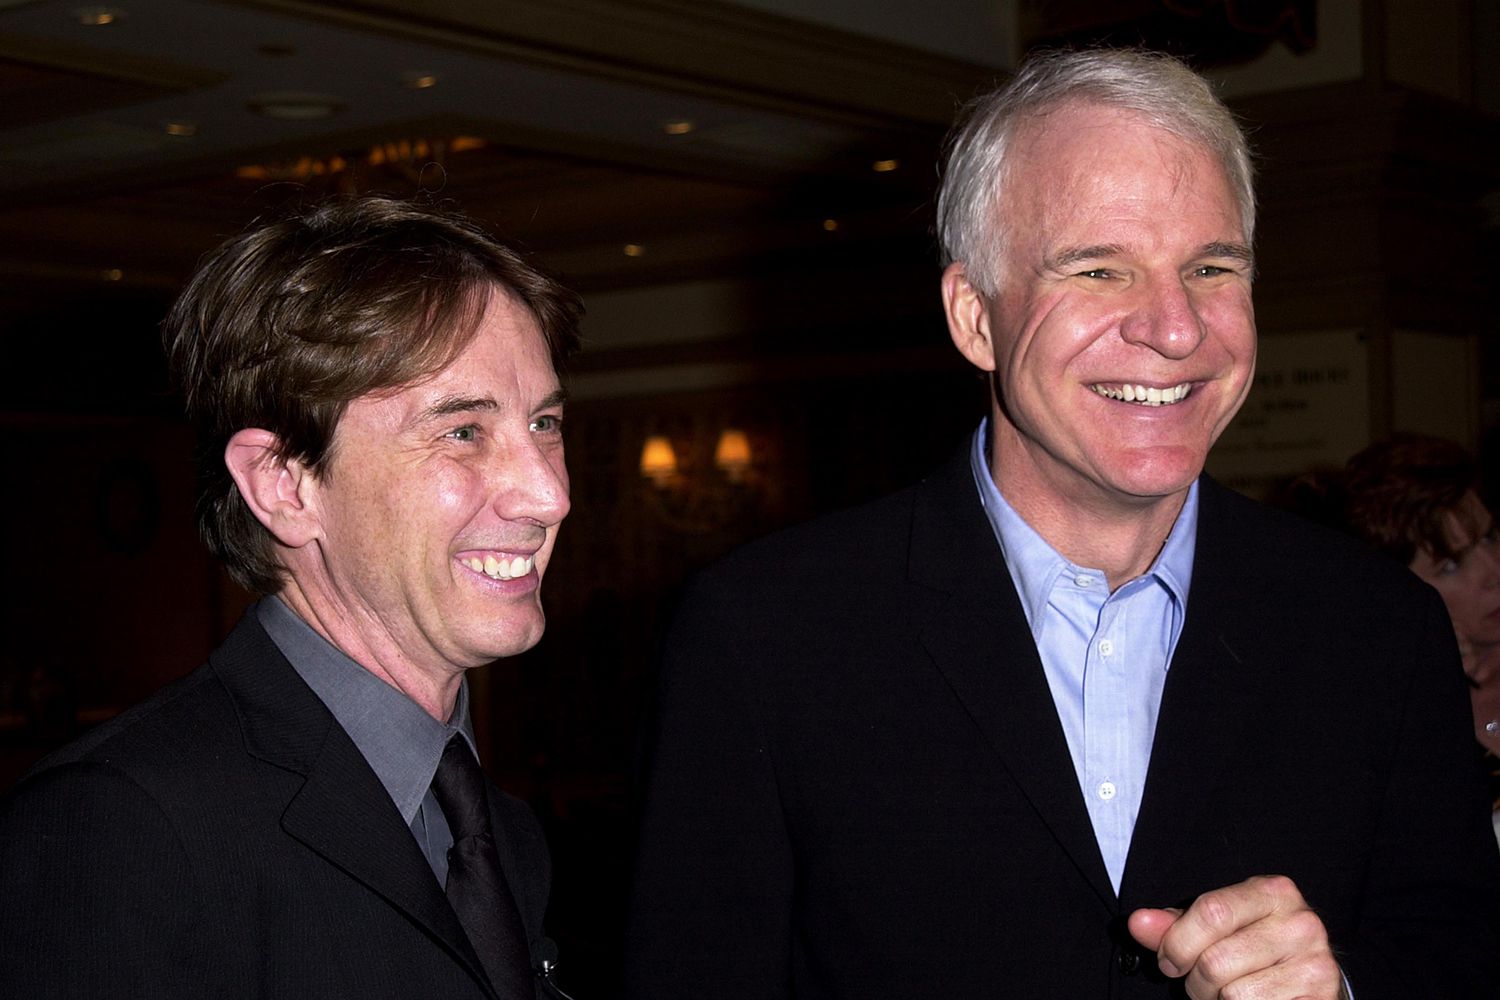 Martin Short Hopes to ‘Keep Laughing’ with Steve Martin After 40 Years of Friendship (Exclusive) [Video]